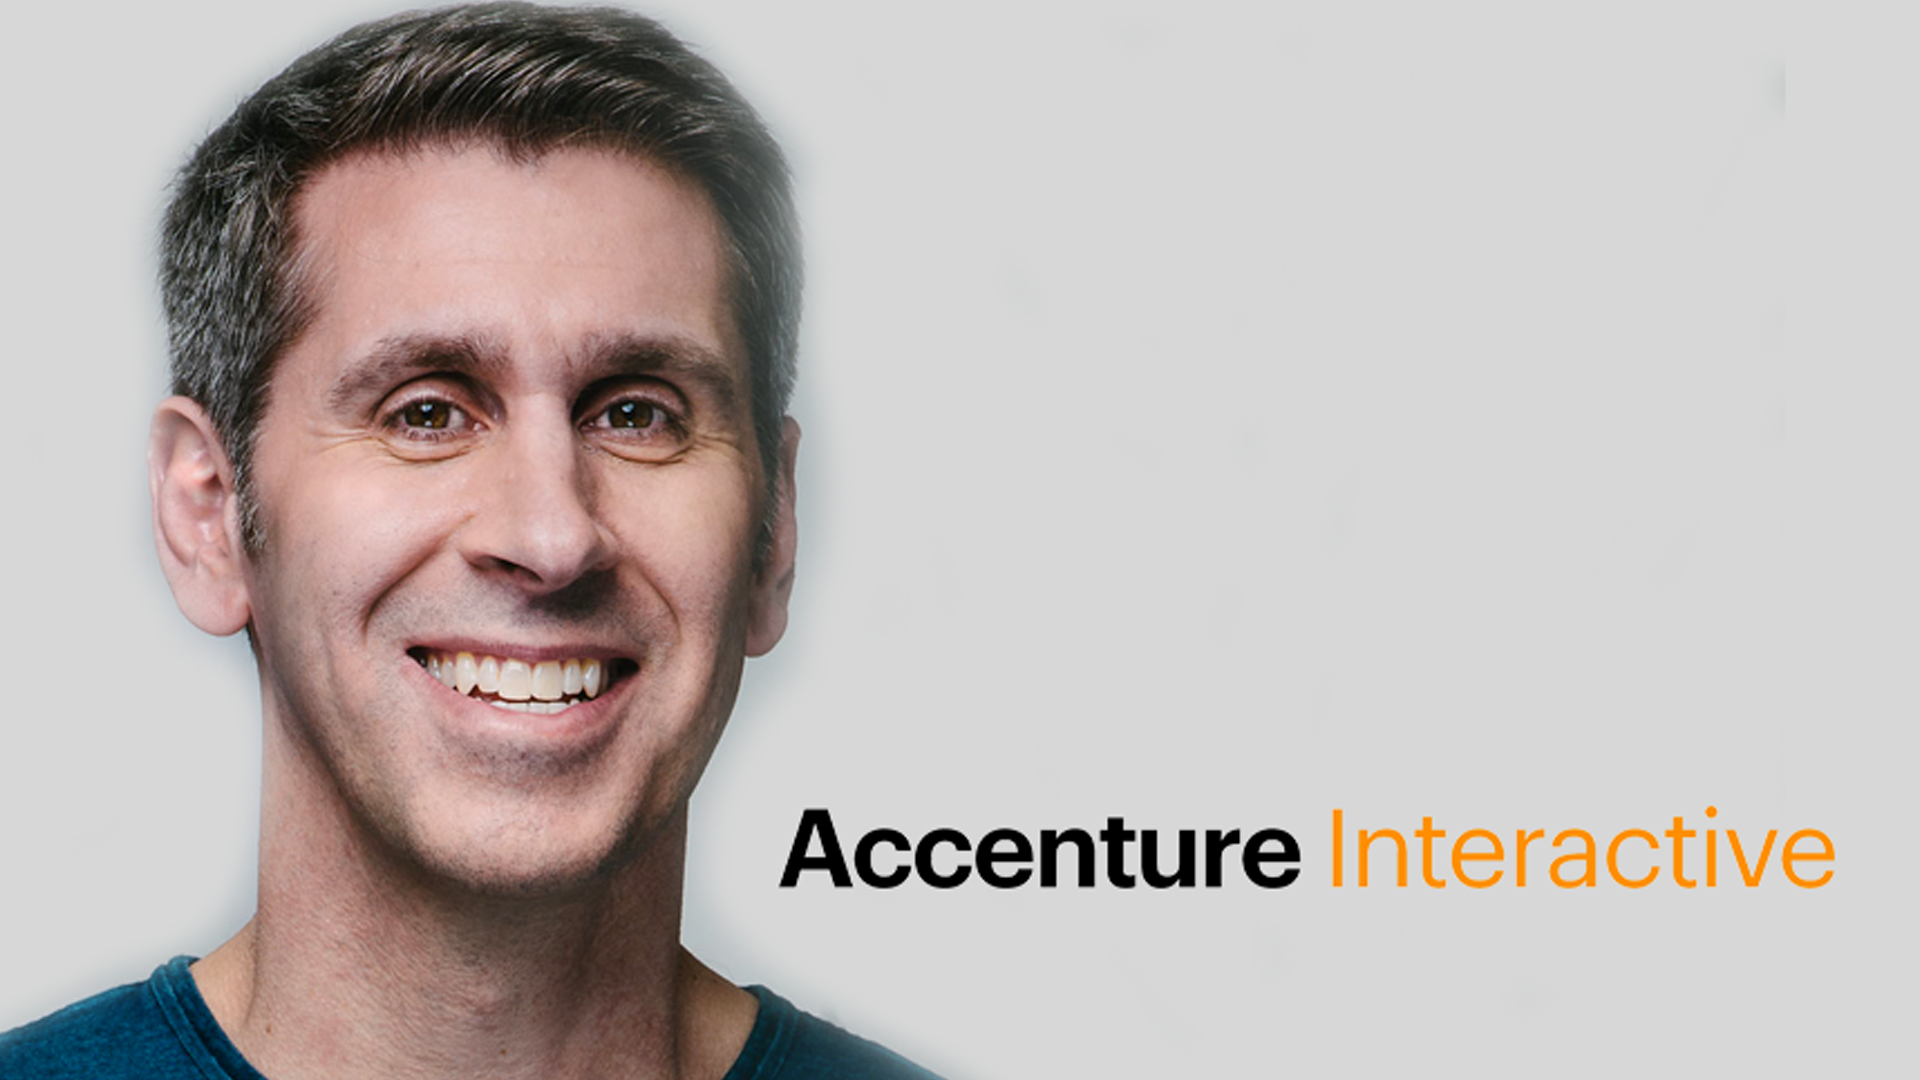 CPO of the Future: A Chat with Jeriad Zoghby – Global Personalization Lead, Accenture Interactive